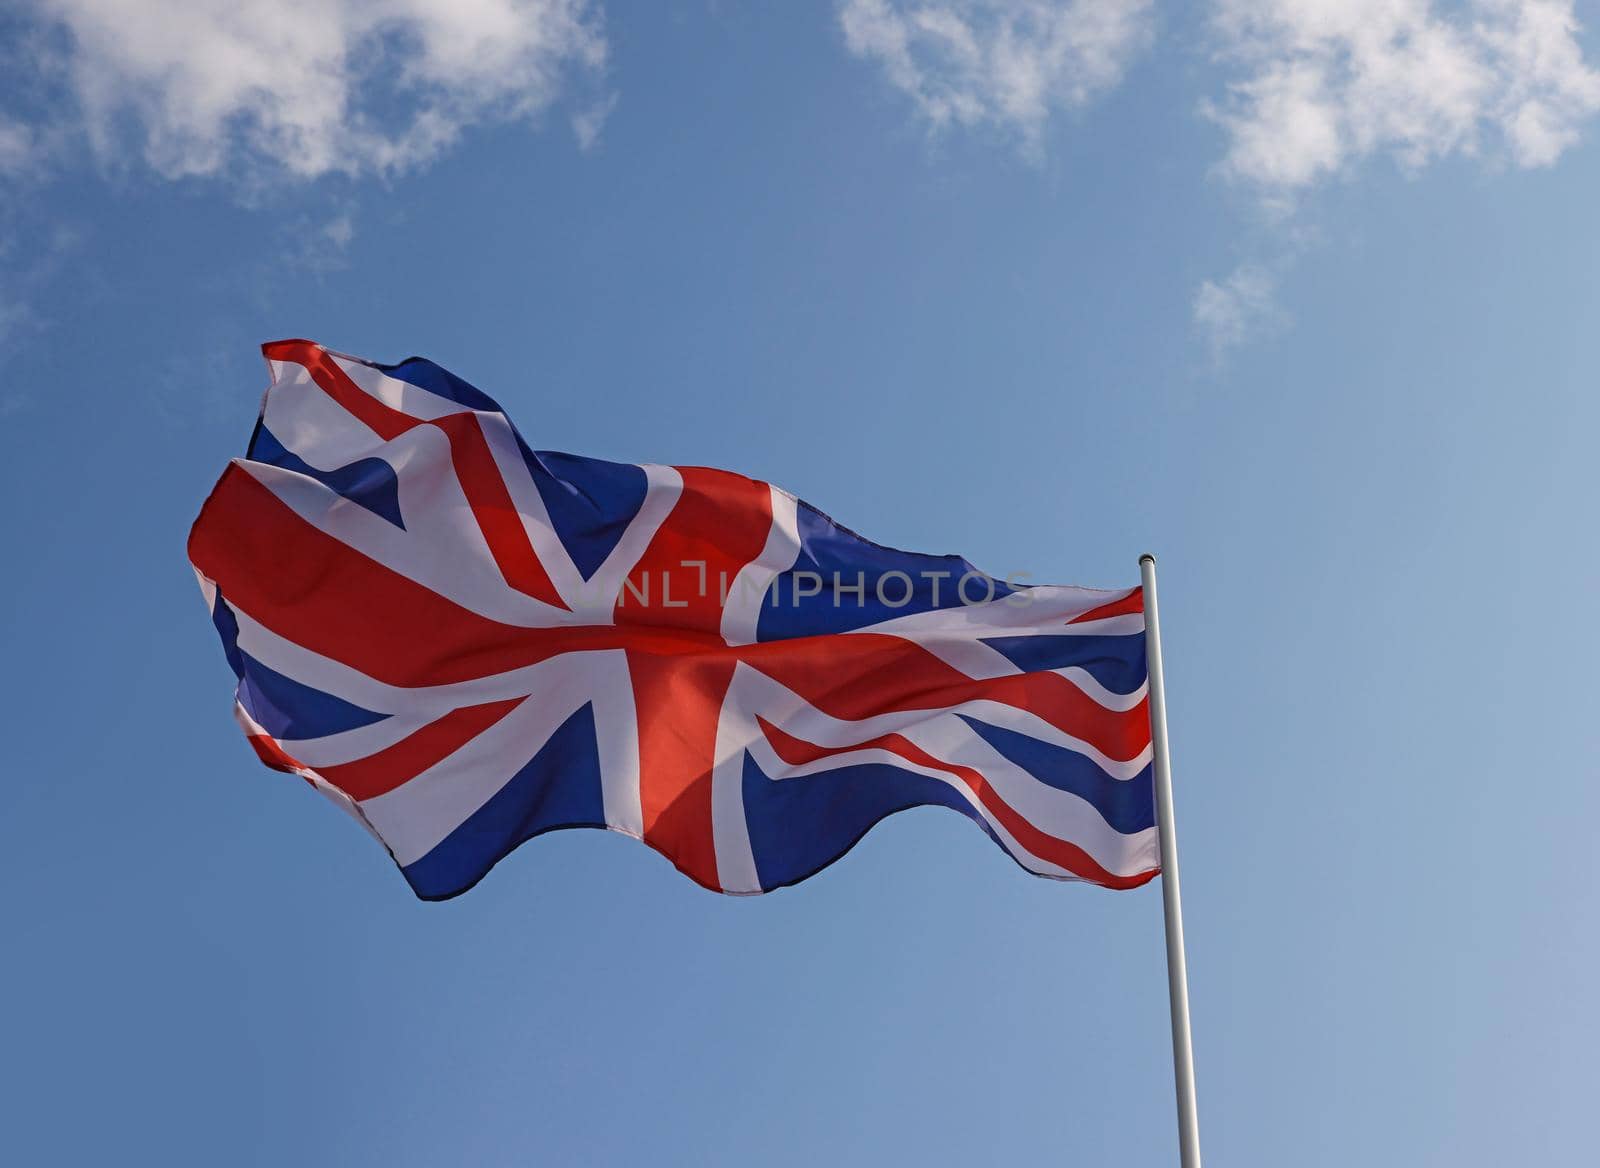 UK Great Britain national flag flying and waving in the wind over clear blue sky, symbol of British patriotism, low angle, side view